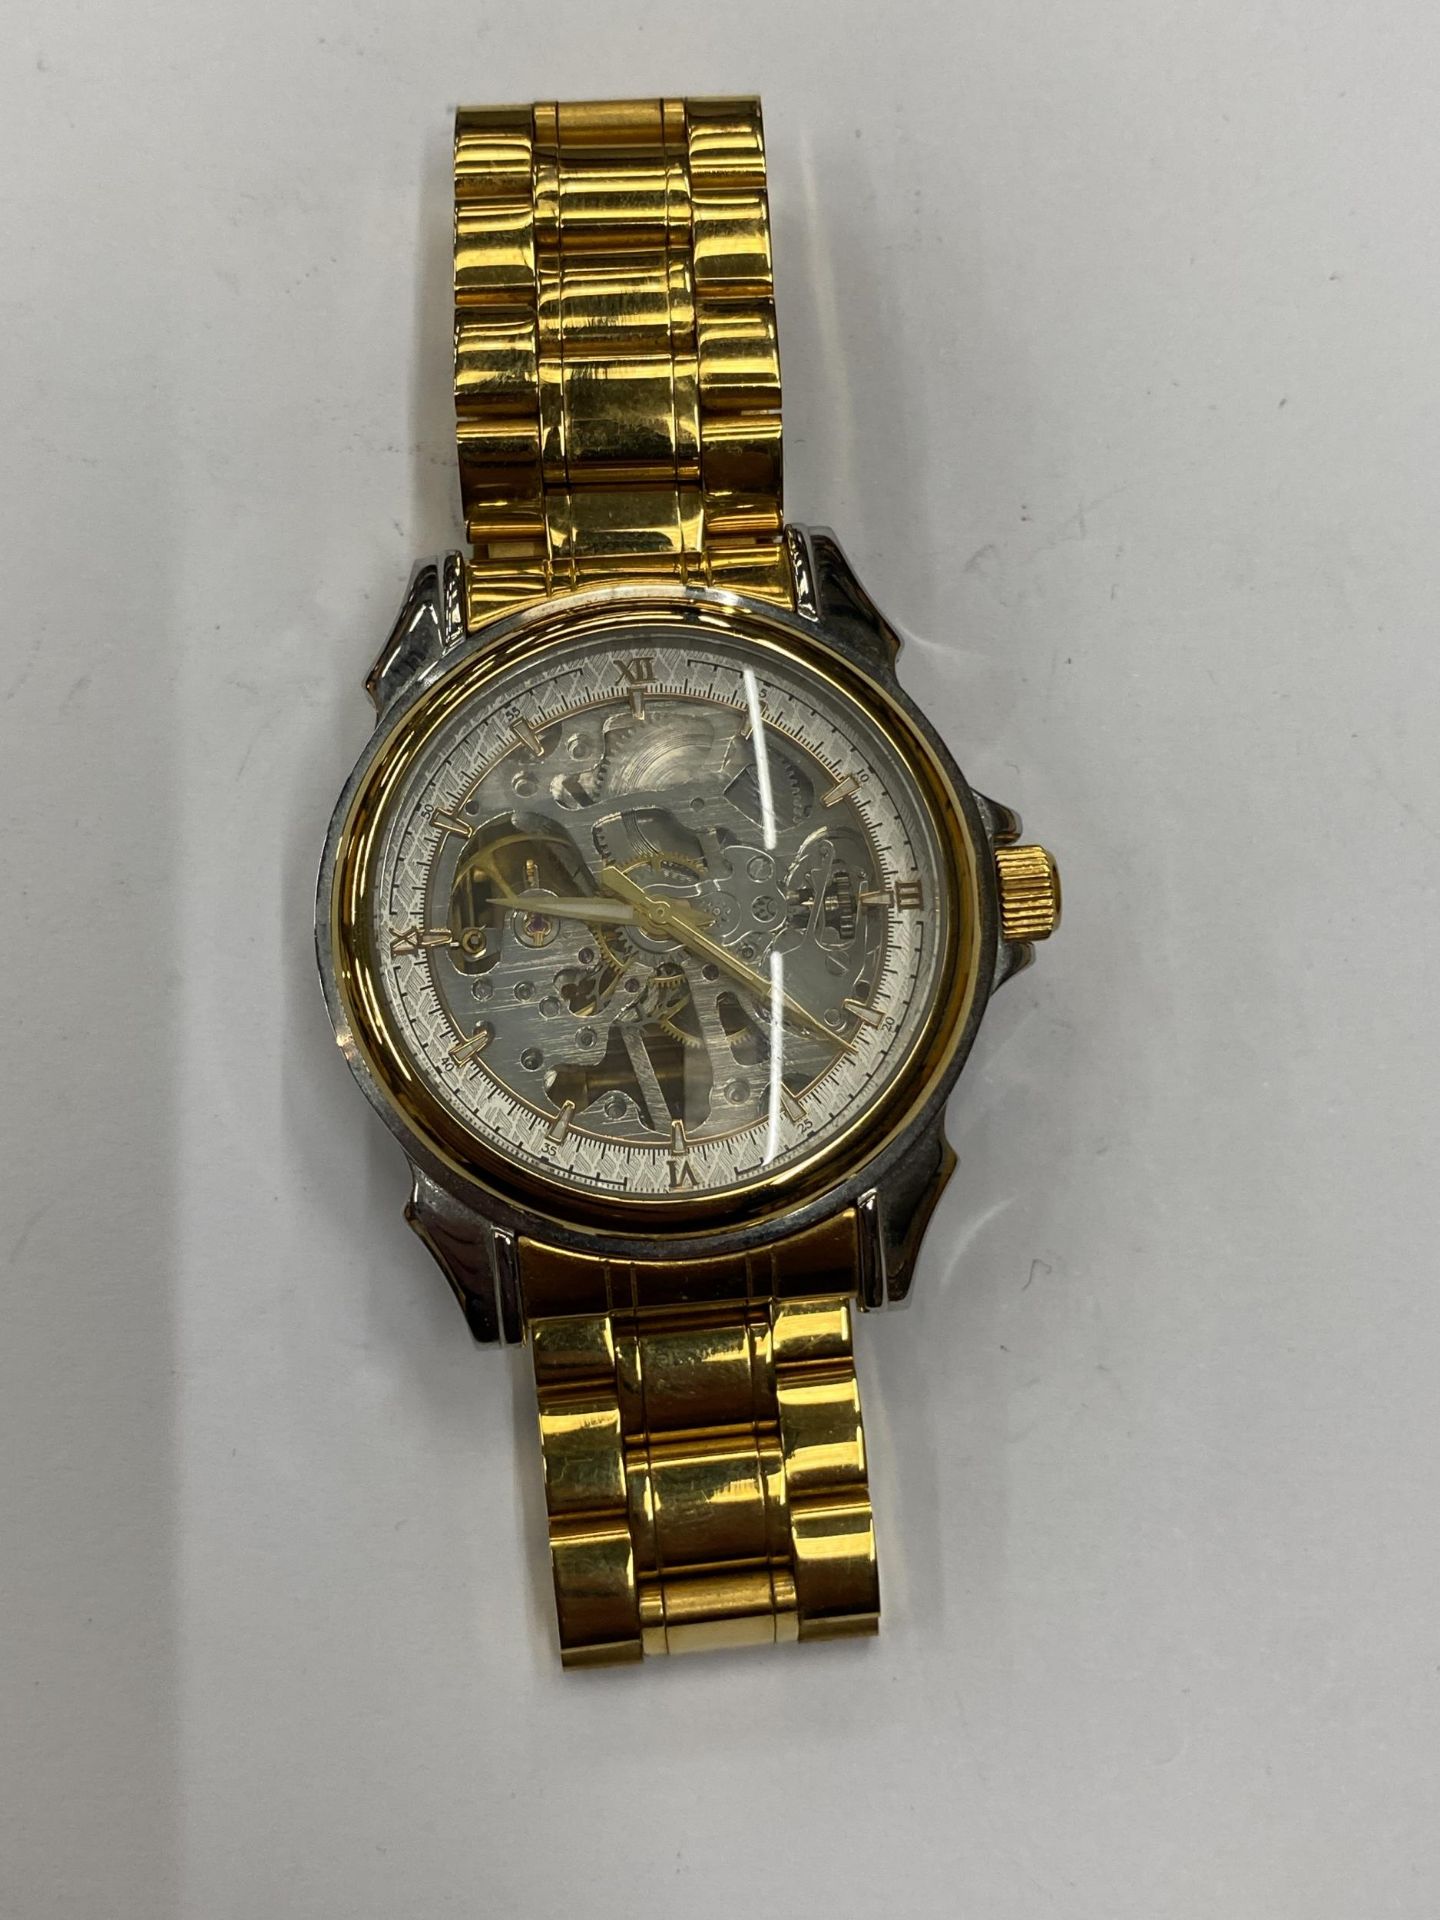 A GENTS SKELETON WATCH, WORKING WHEN CATALOGUED BUT NO WARRANTIES GIVEN